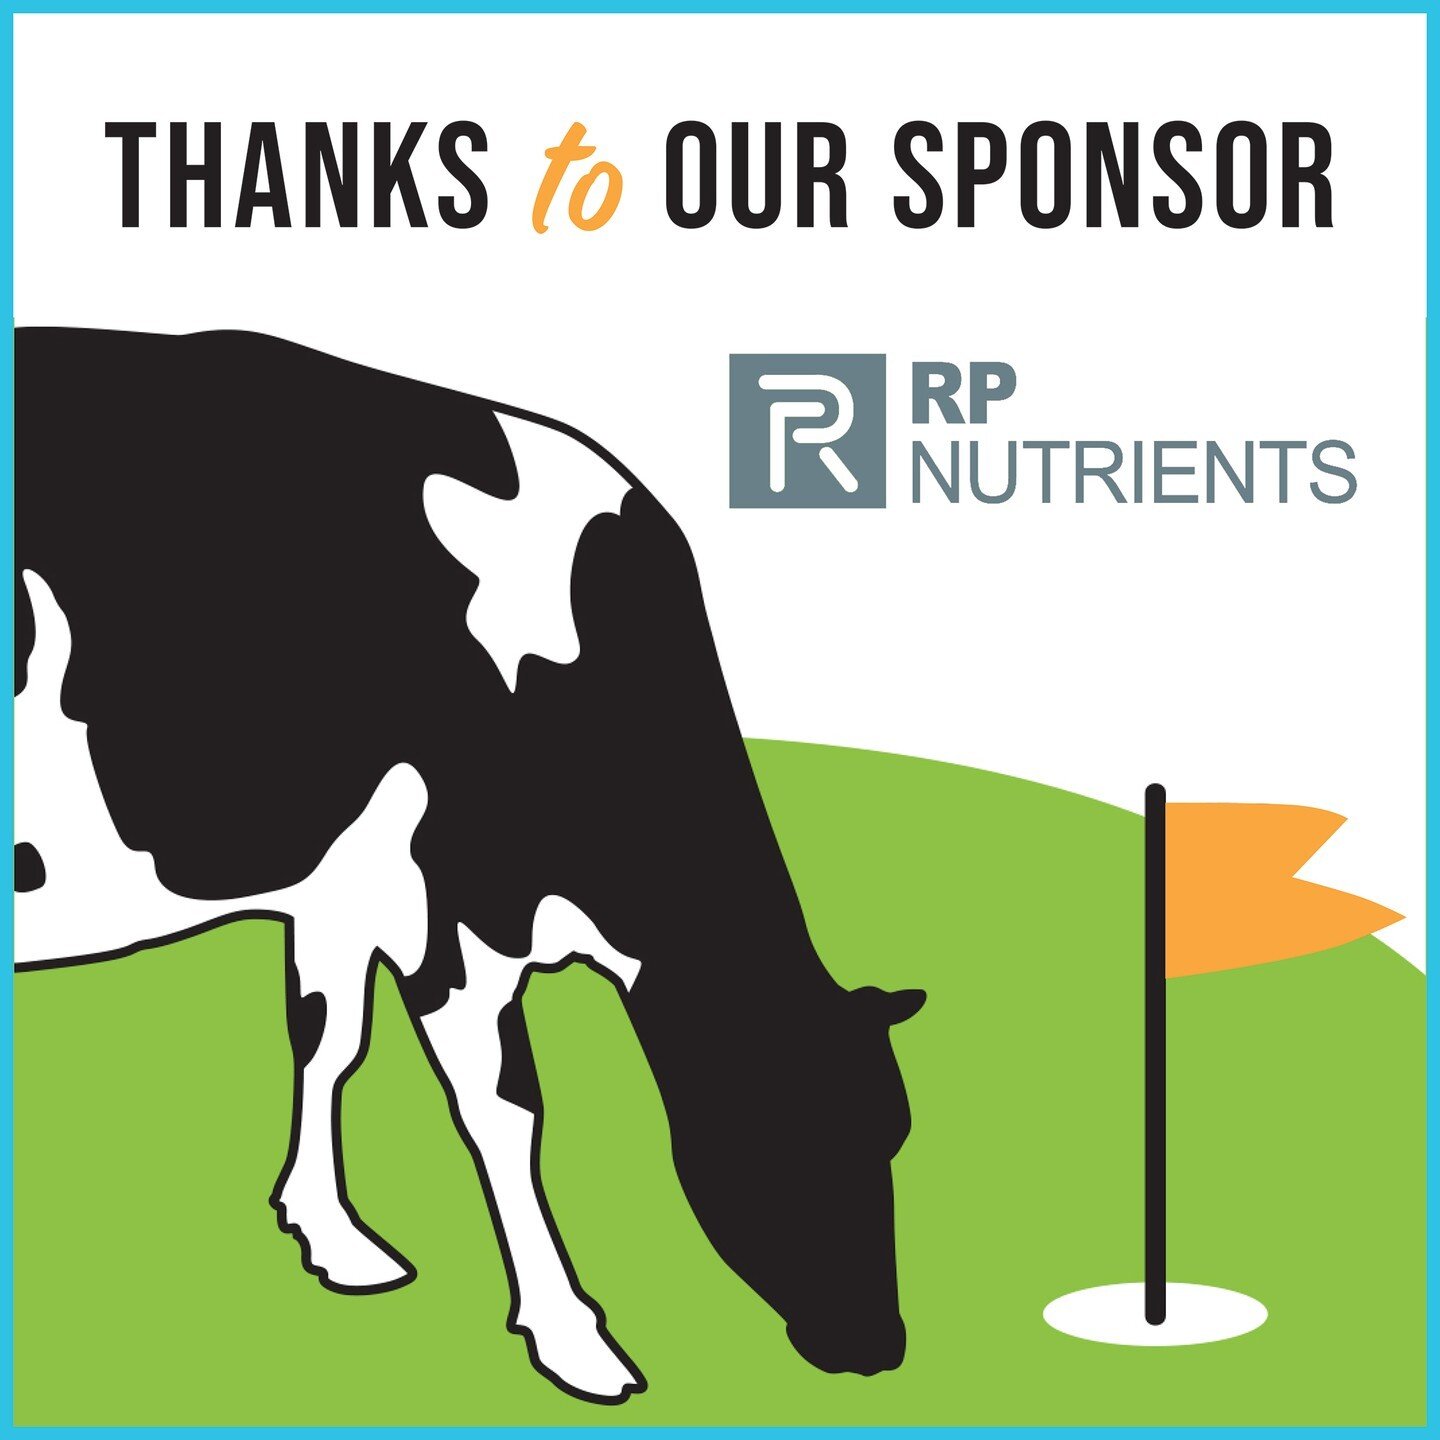 New this year - get a grilled cheese at Grazing on the Greens sponsored by RP Nutrients! Don't miss our tournament on August 3rd!